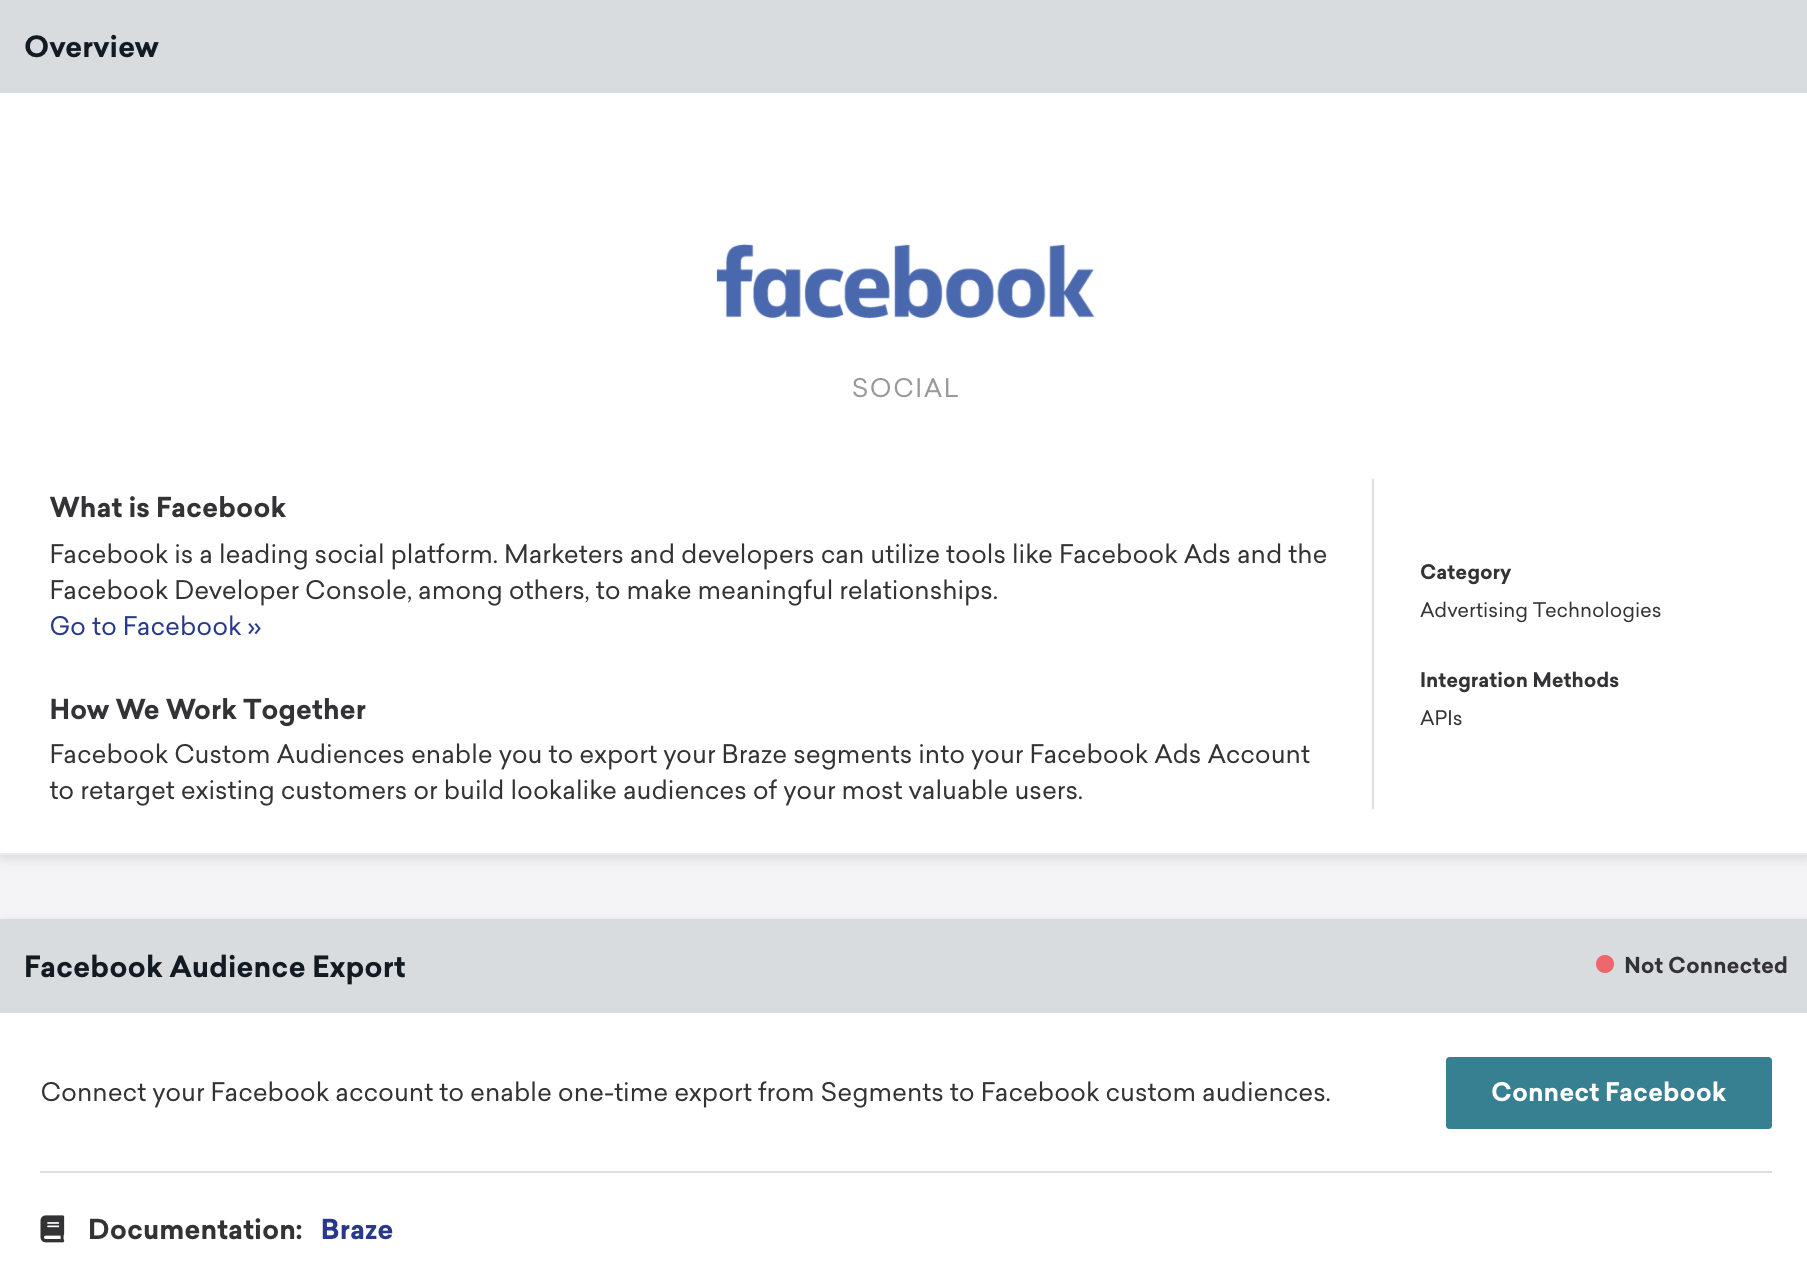 Facebook technology page in Braze that includes an Overview module and Facebook Audience Export module with the Connected Facebook button.